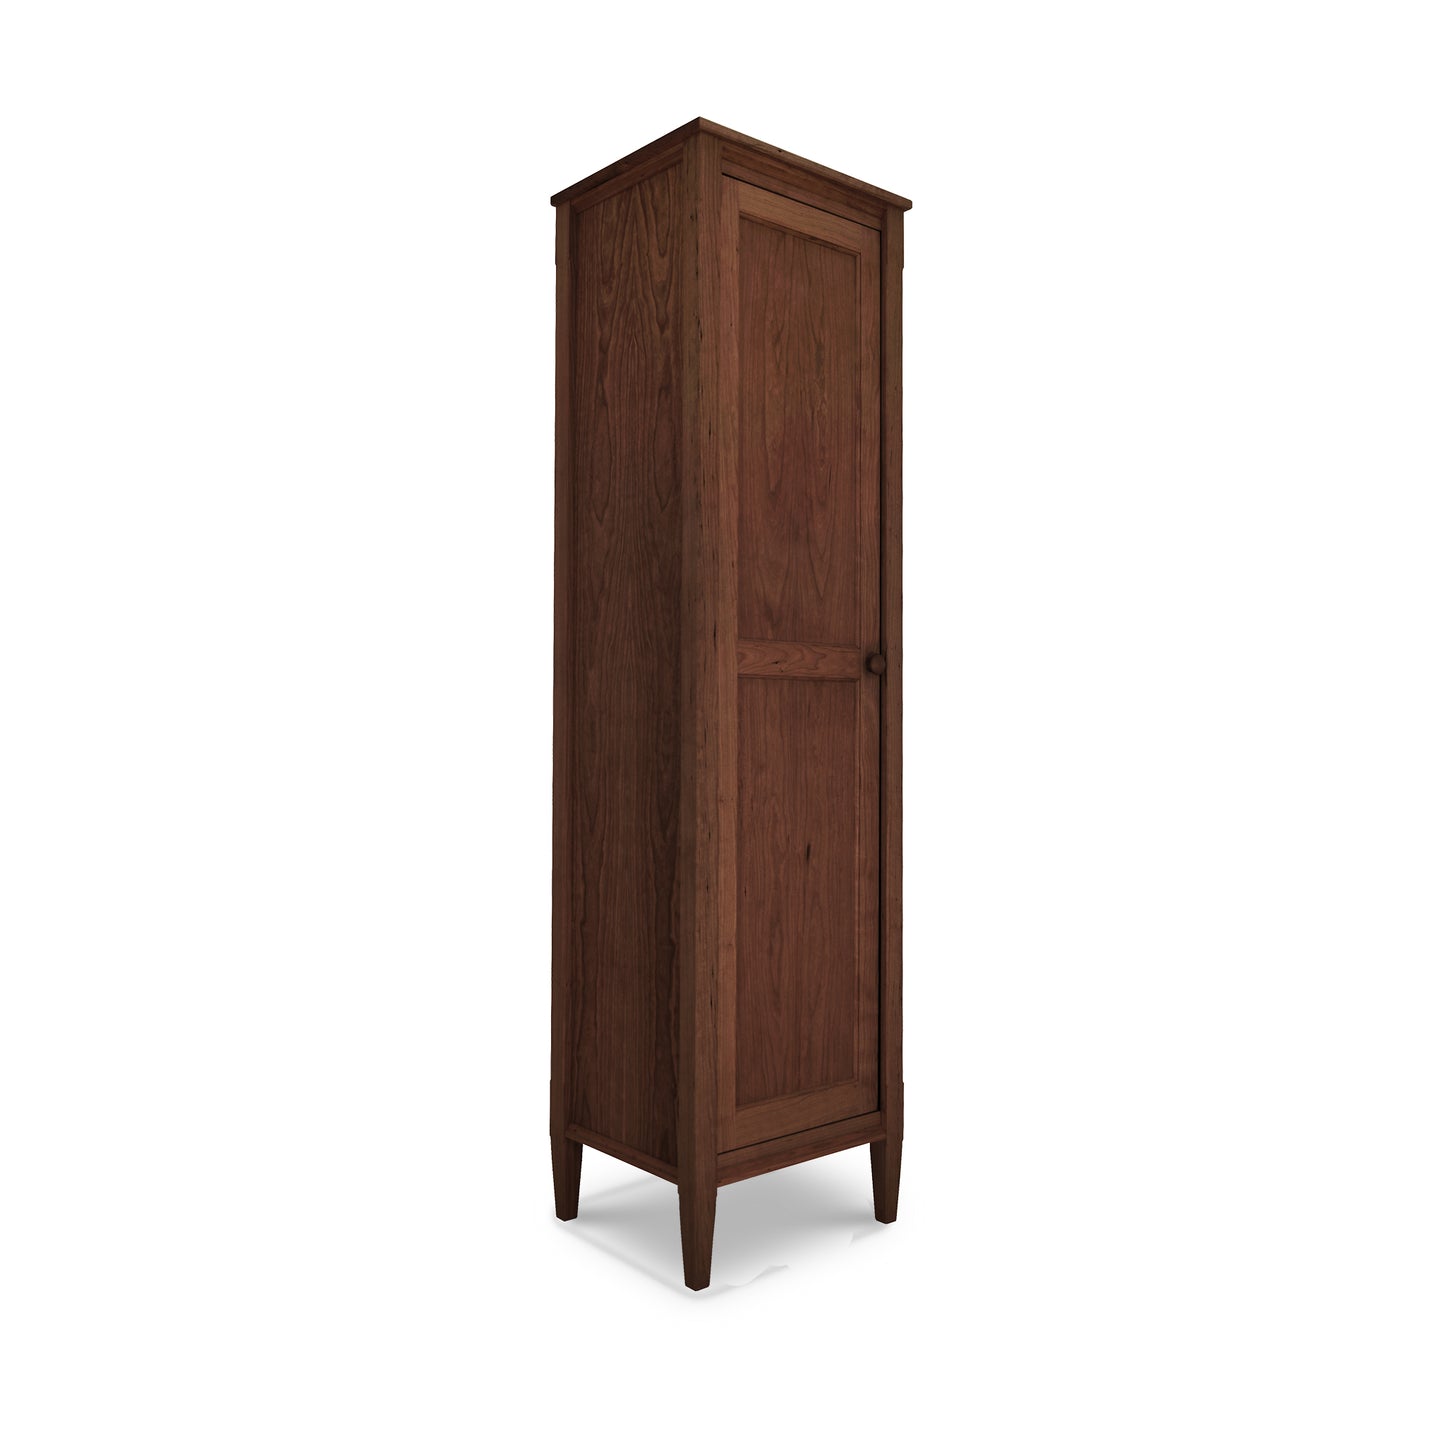 A tall Vermont Shaker Narrow Bookcase with Mirror from Maple Corner Woodworks, with closed doors, standing isolated against a white background.